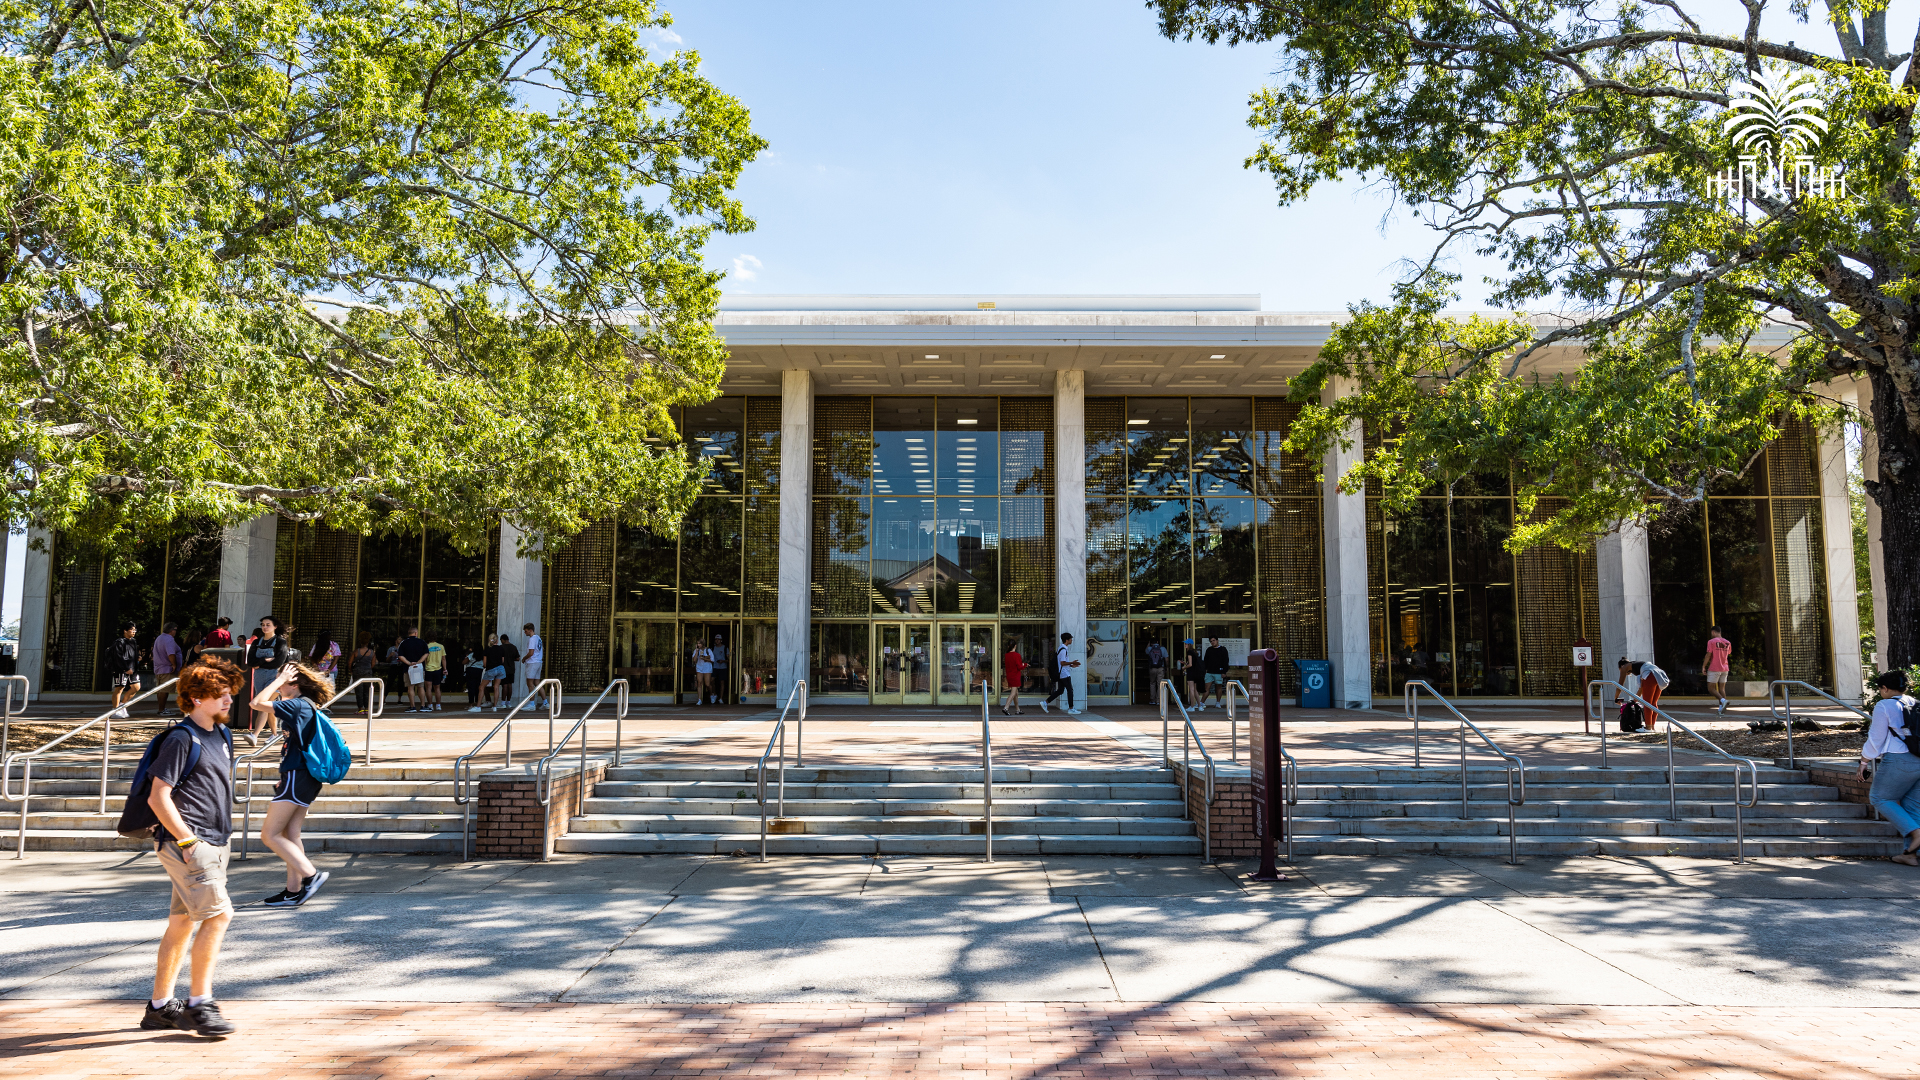 The front entrance of Thomas Cooper Library with tree and gates mark